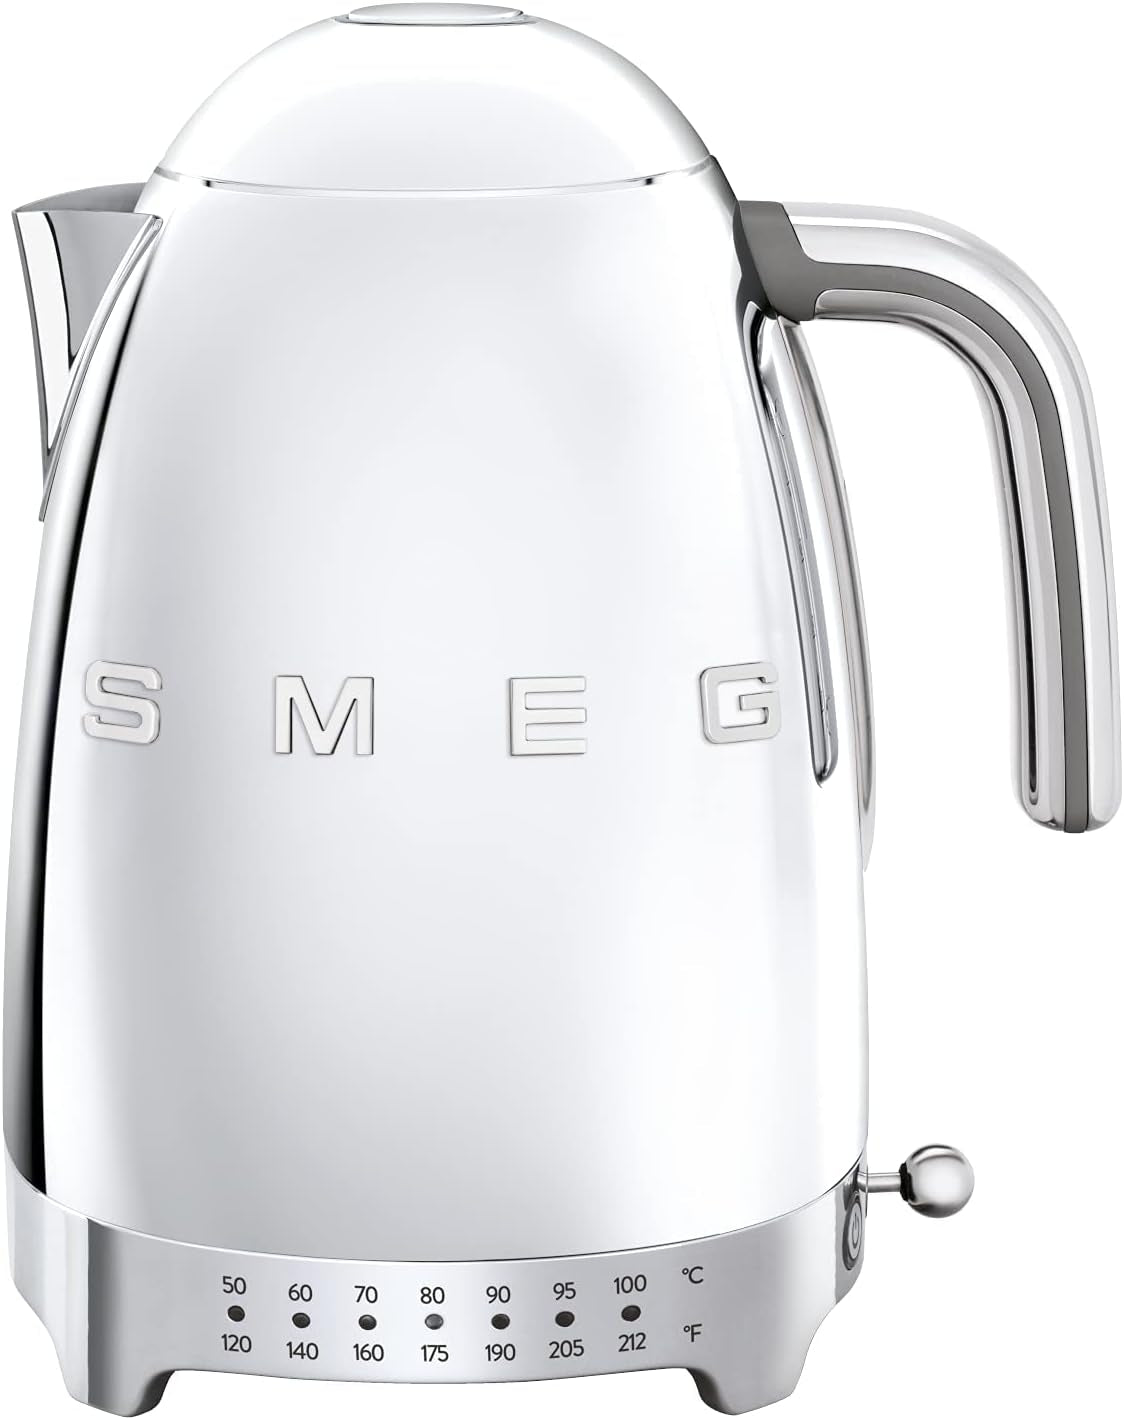 Variable Electric Kettle KFL04 SSUS, Polished Stainless Steel